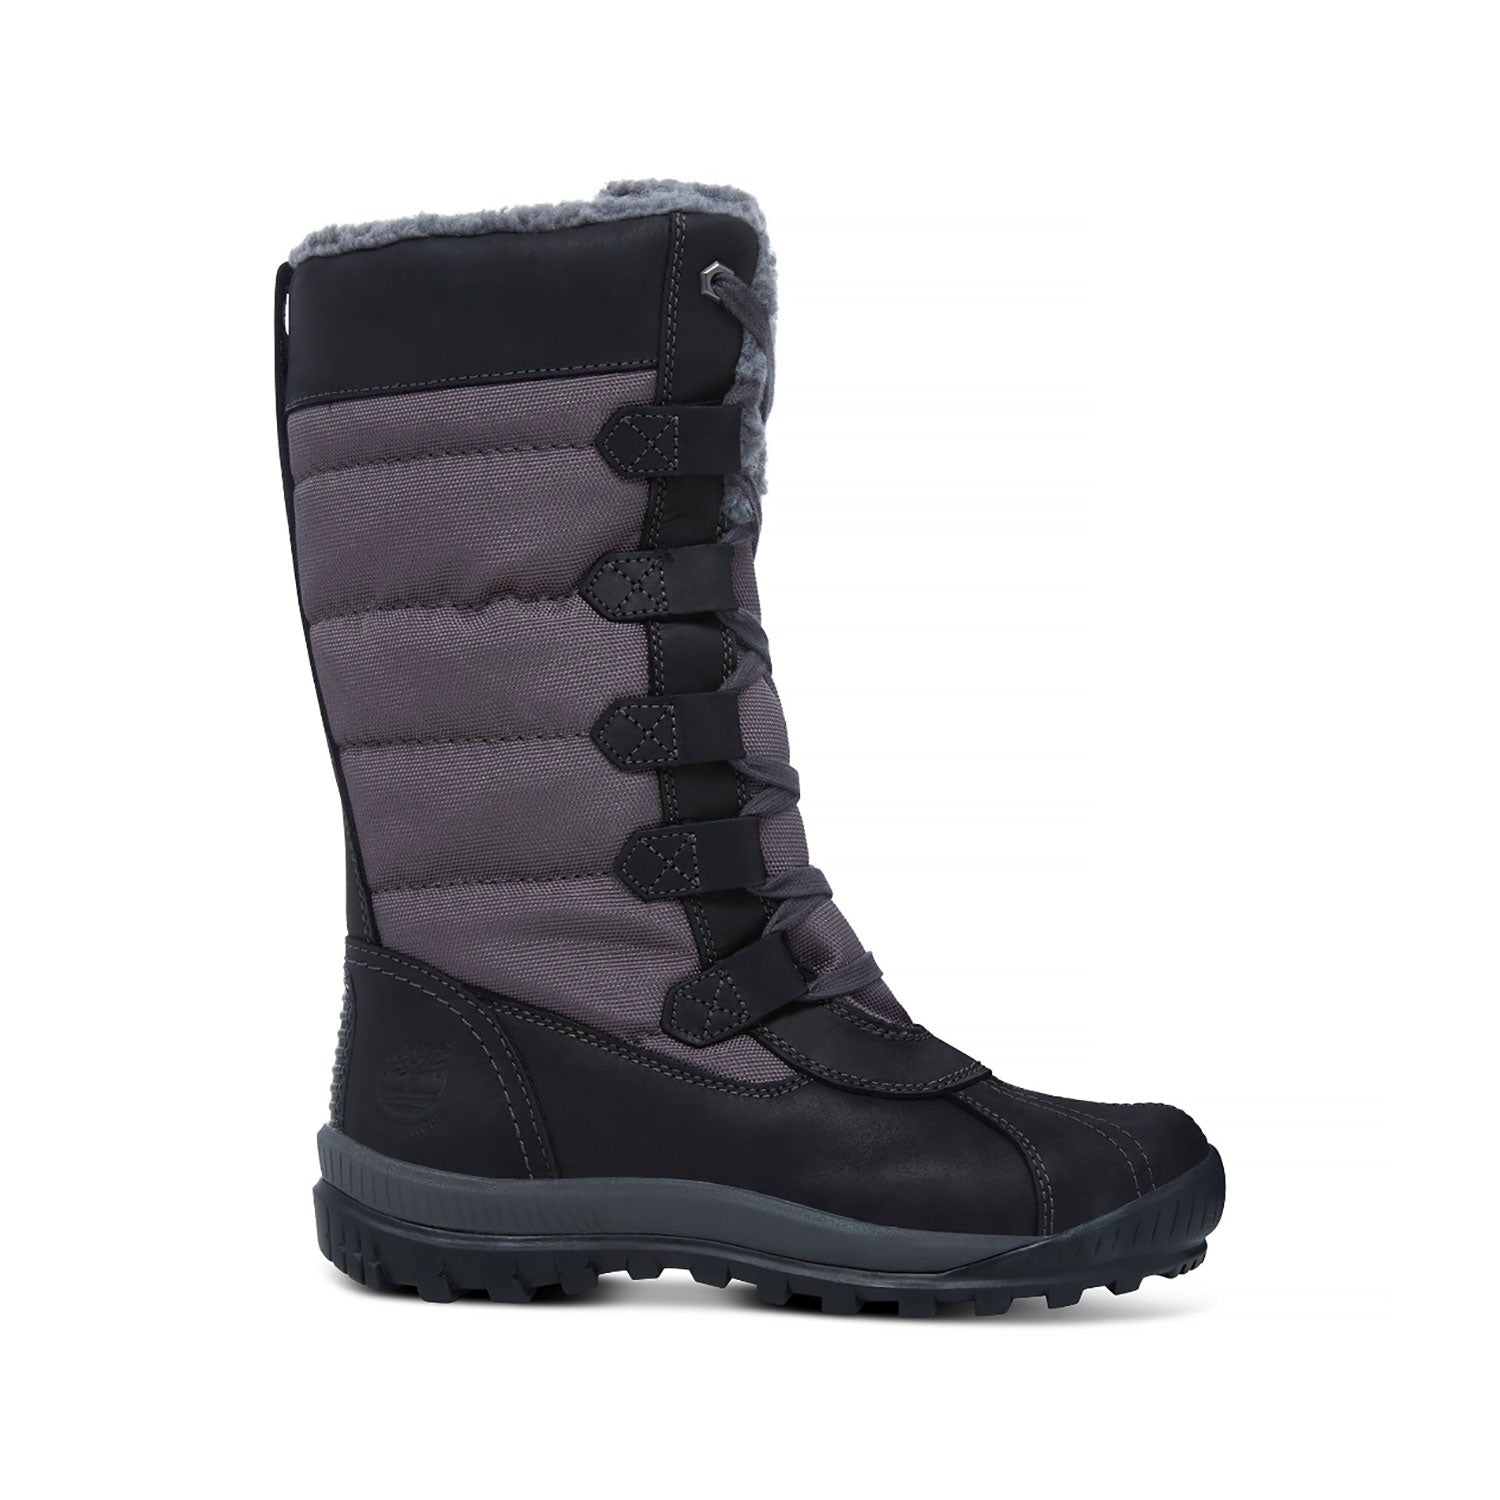 Timberland Women's Mt. Hayes Tall Waterproof Boots | Altitude Sports